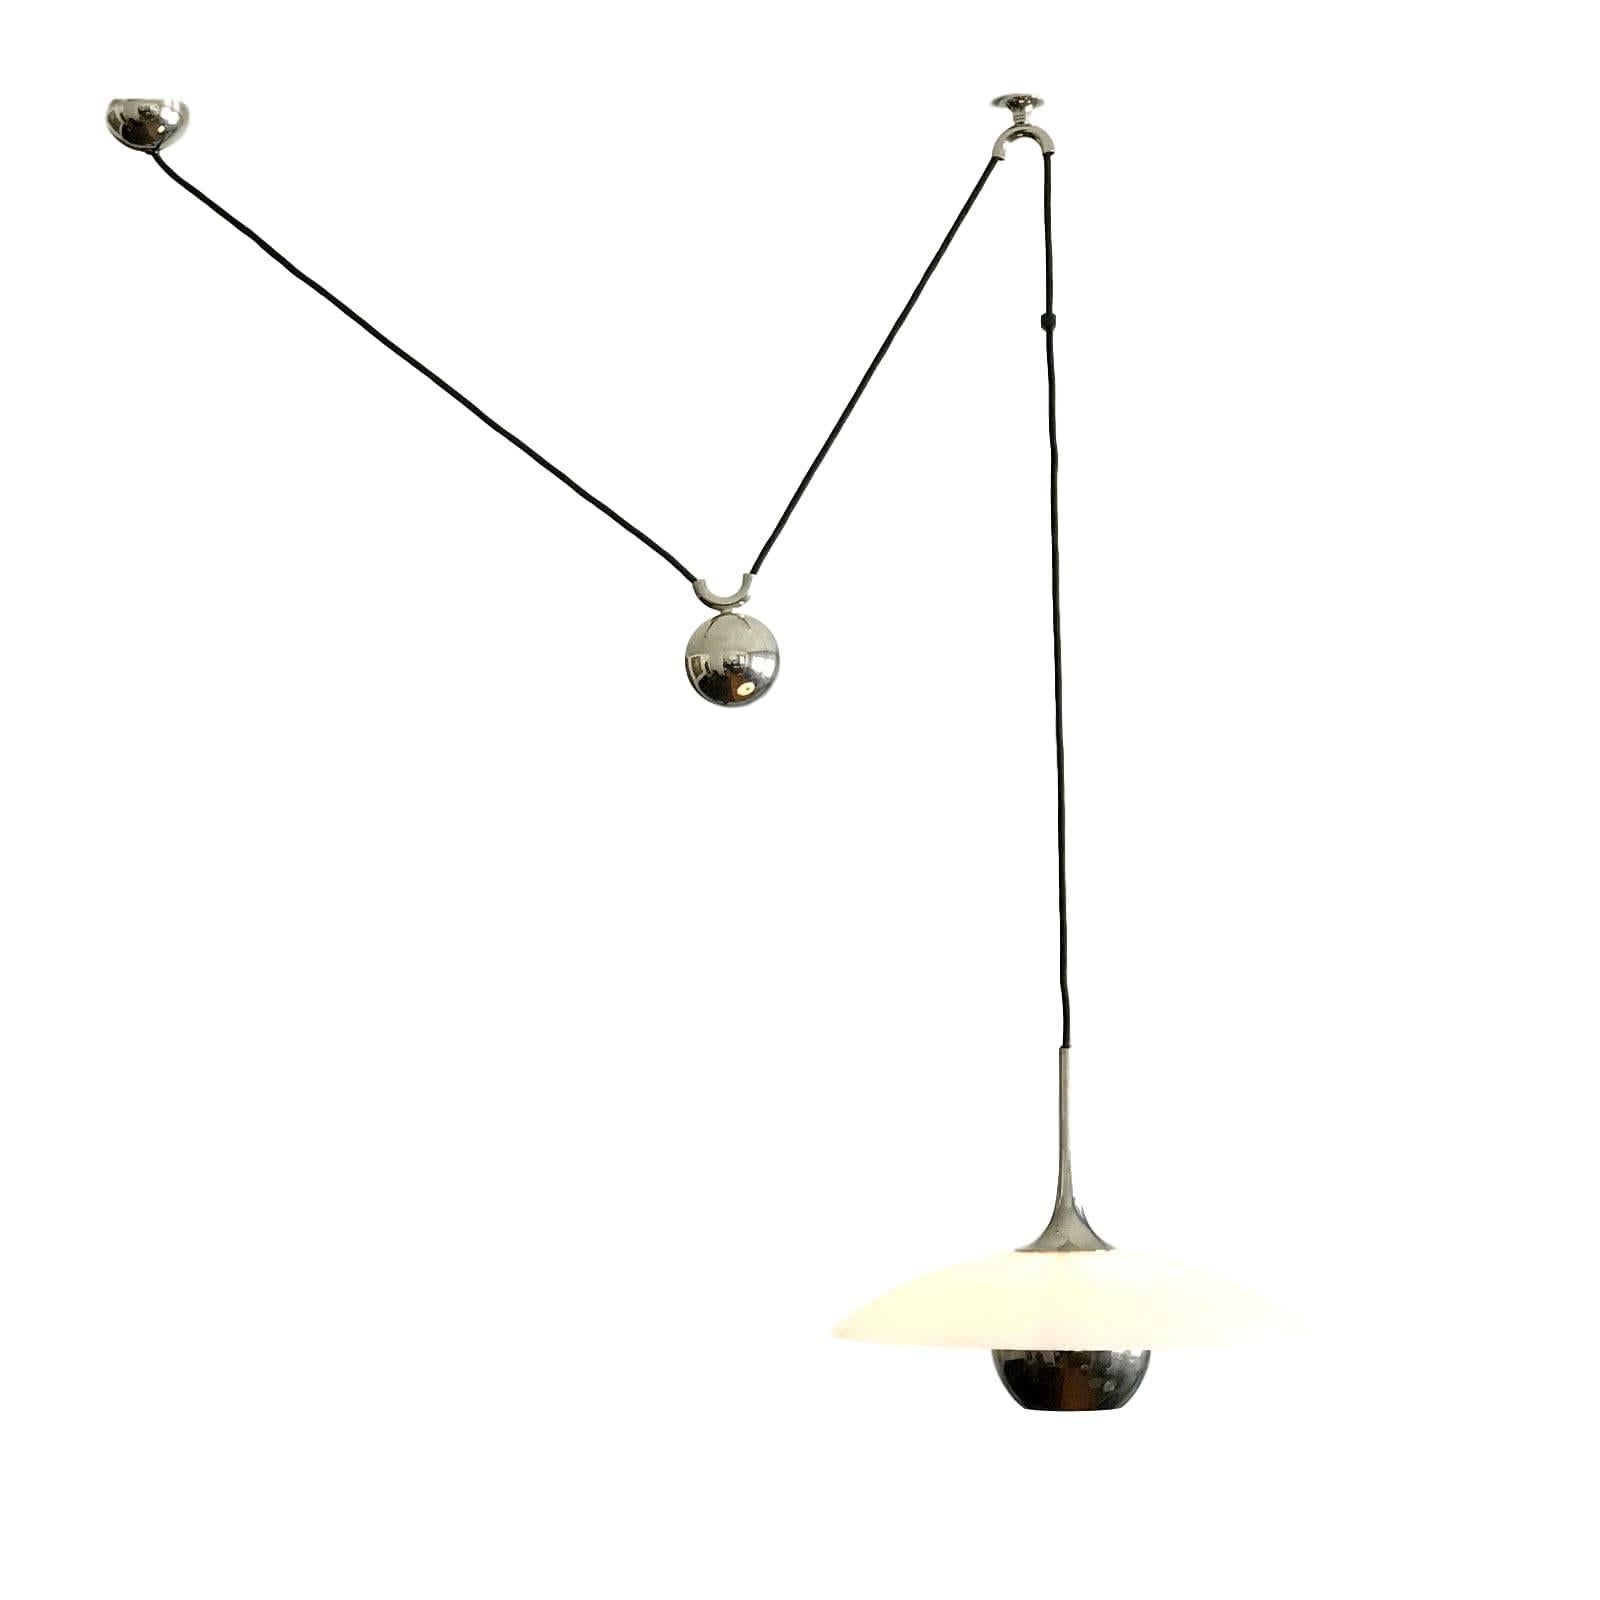 Extremely cool Florian Schulz counter balance light. Nickel hardware, nickel counterweight and glass shade disc. Never seen this one before. Excellent vintage condition. Other Florian Schulz pieces available in separate listings.

Height is